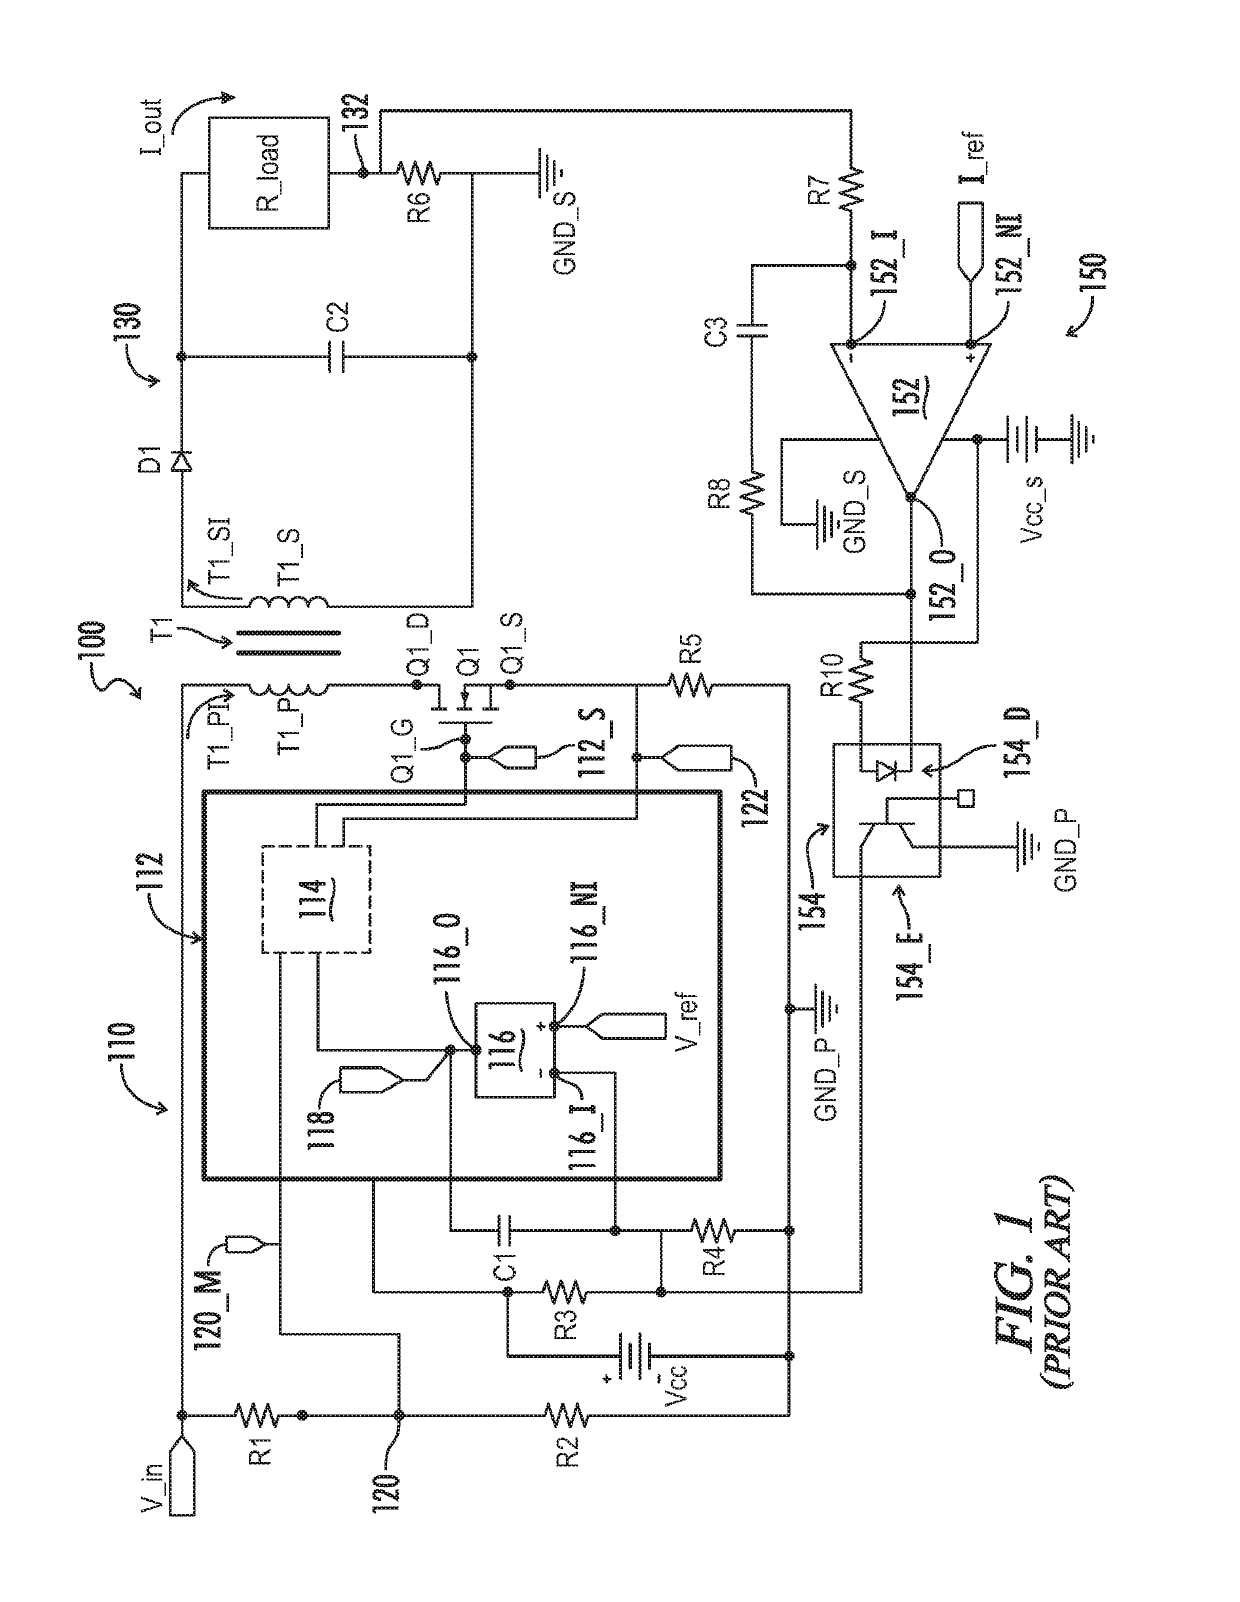 Gate drive IC with adaptive operating mode